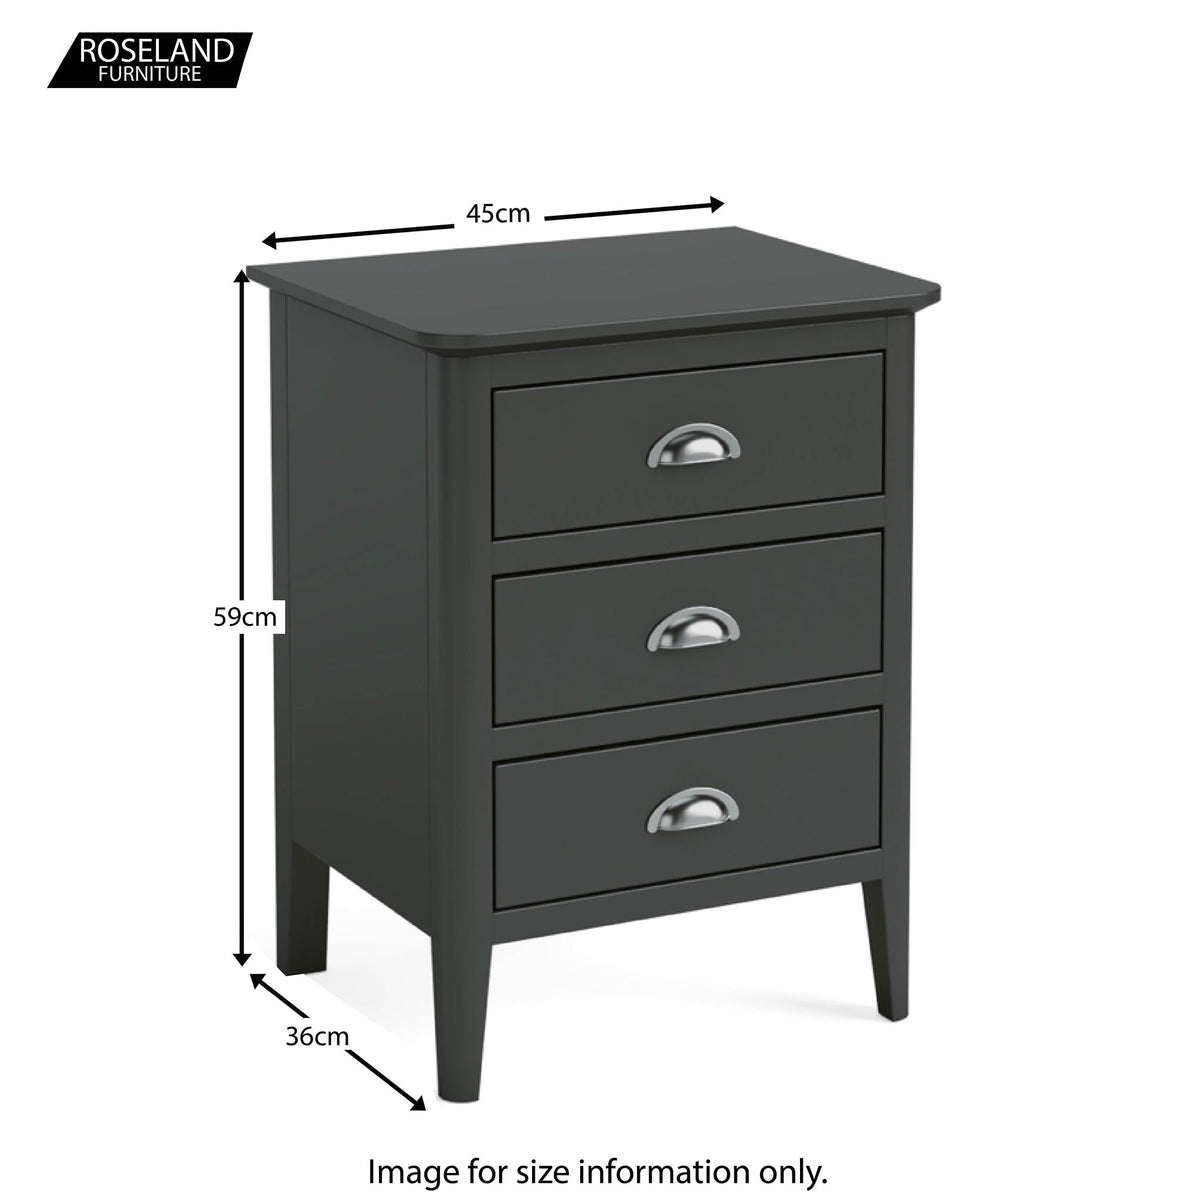 Dumbarton Charcoal Grey Bedside Table - Size Guide